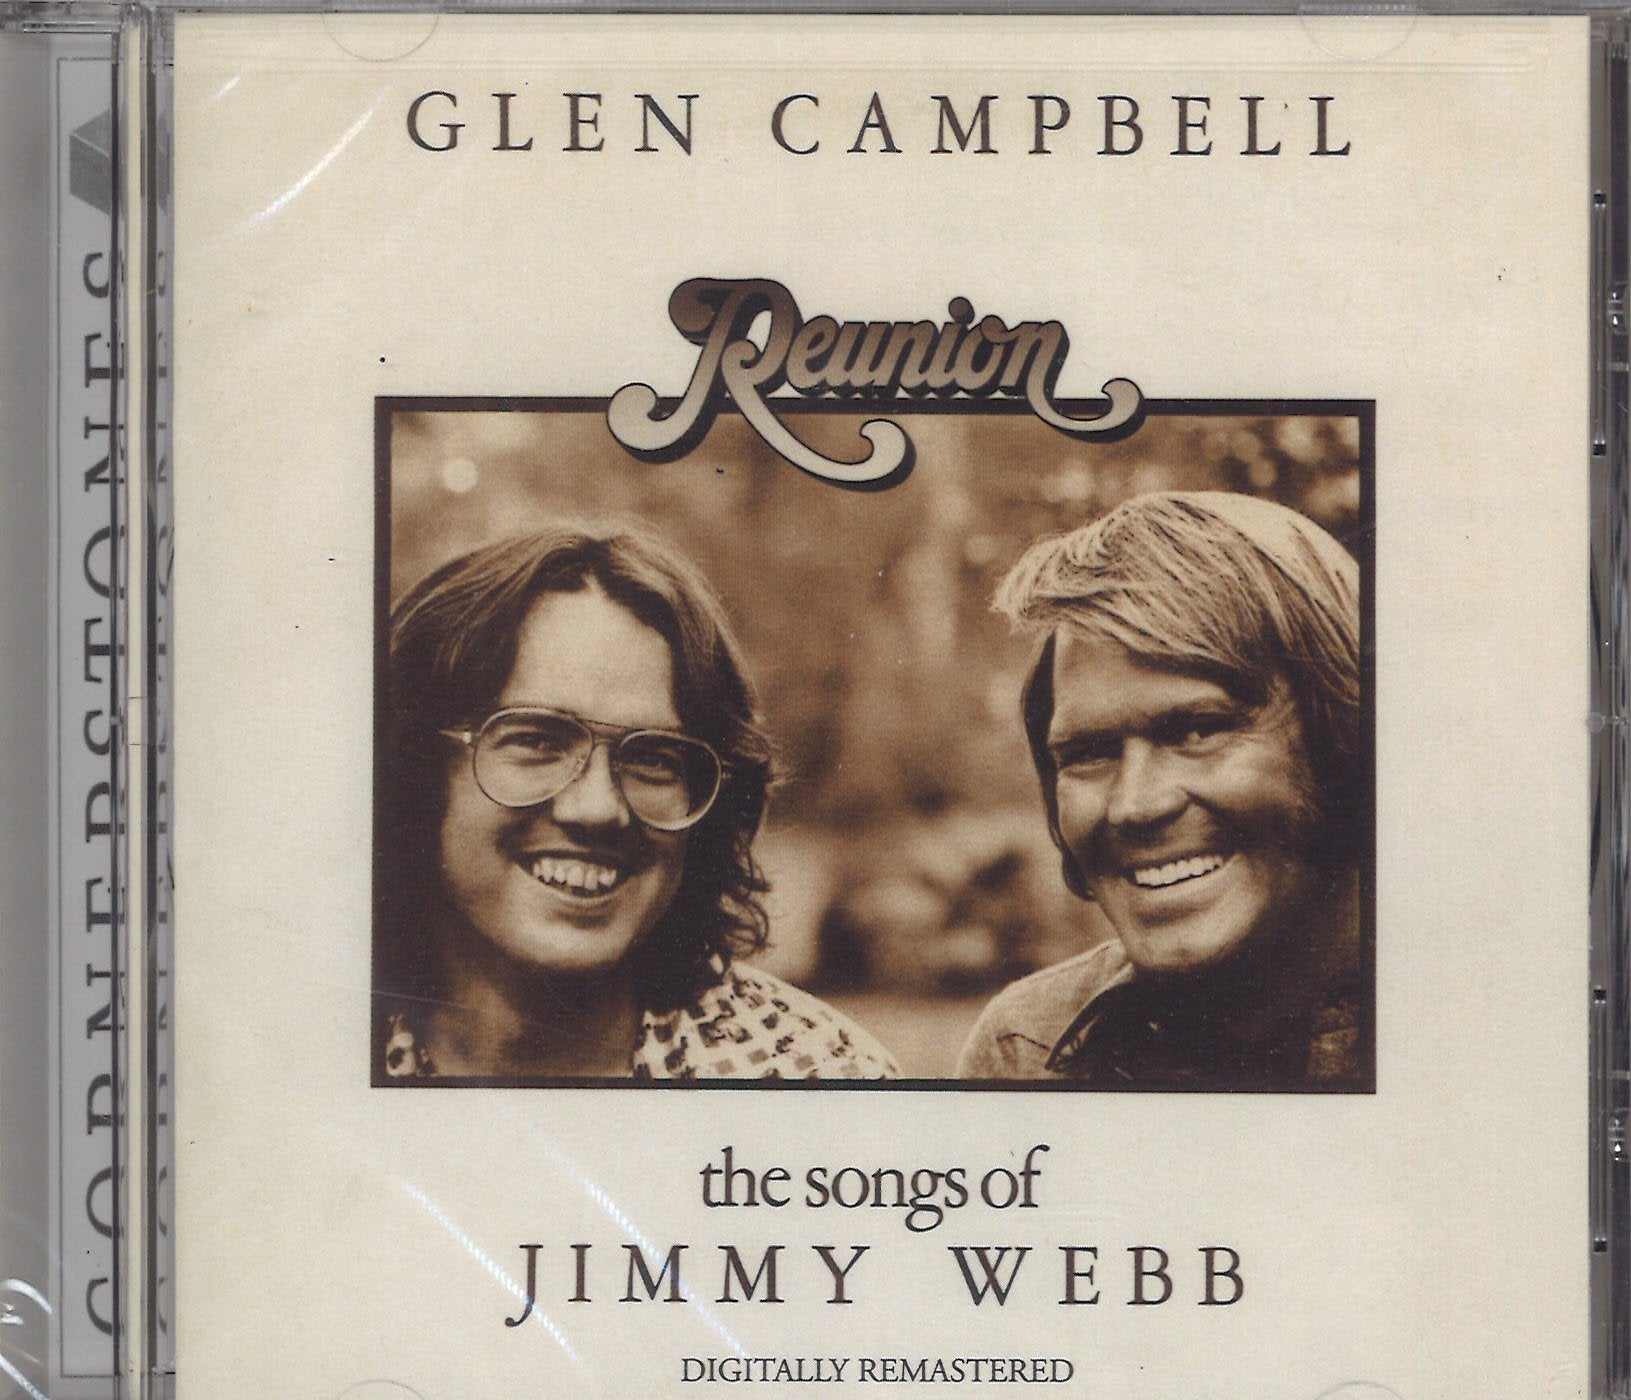 Glen Campbell Reunion - The Songs Of Jimmy Webb